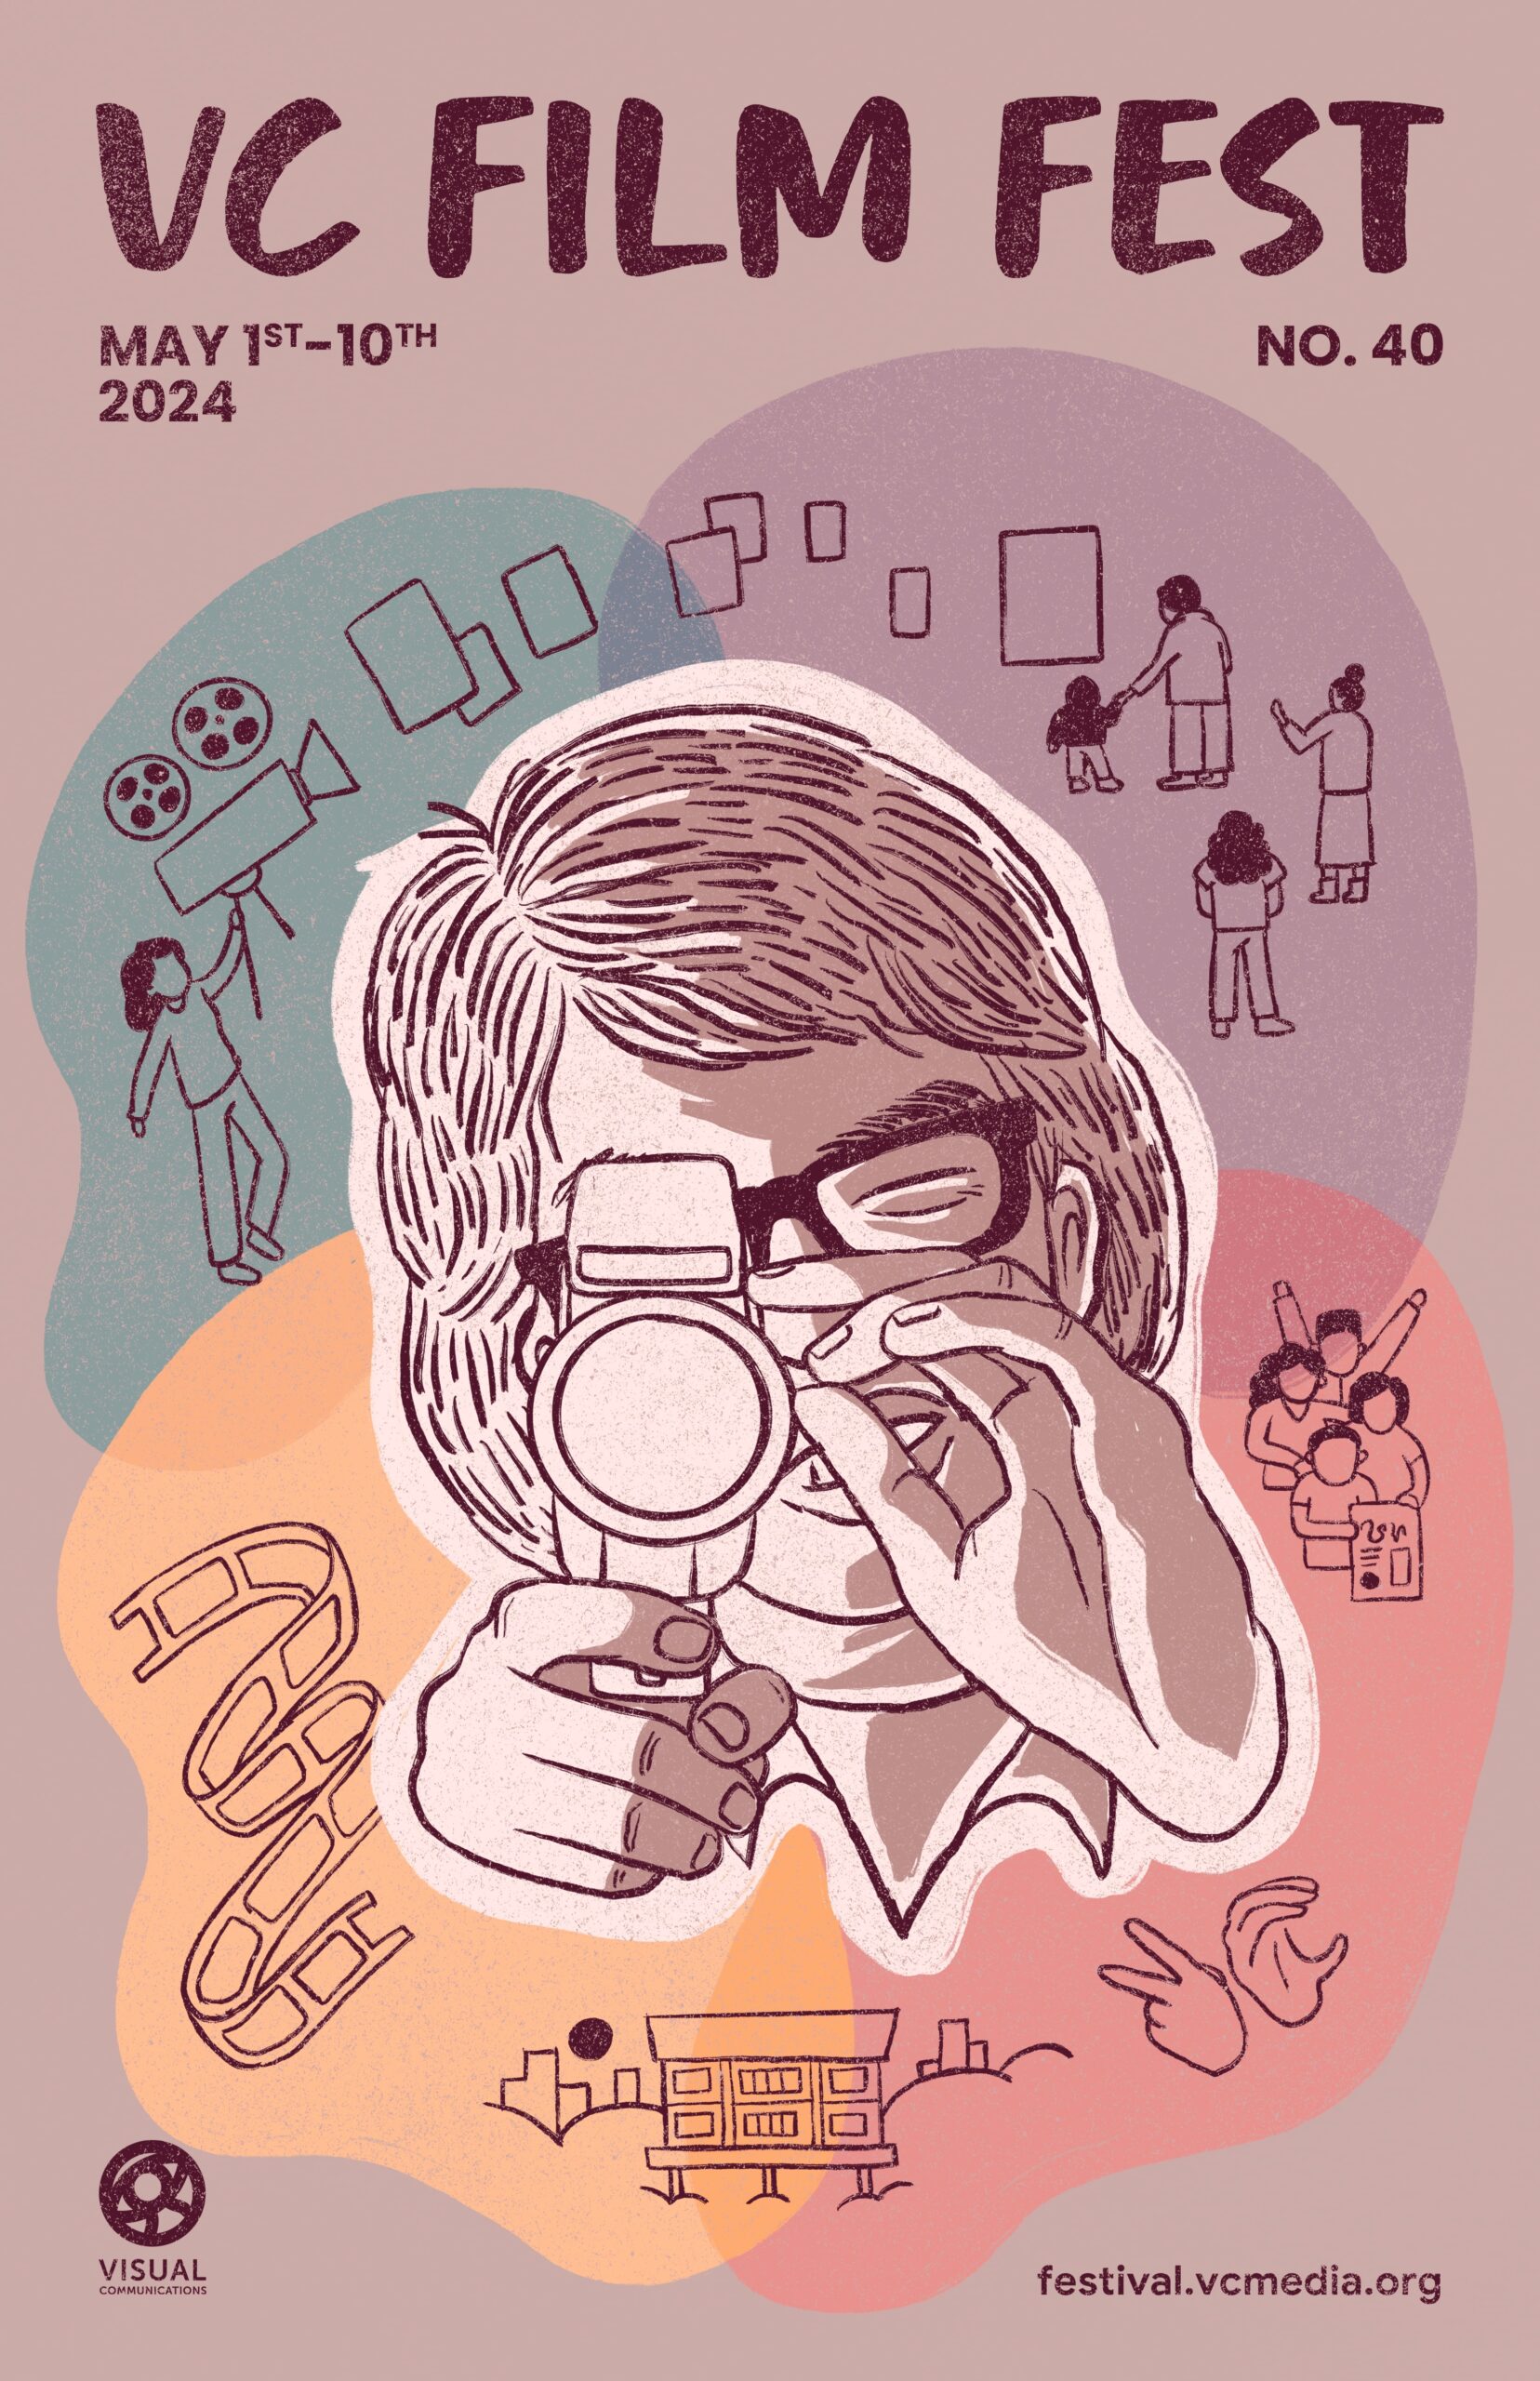 The image is a book cover featuring a cartoon character. The text on the cover includes "VC FILM FEST," "MAY 1ST-10TH," "NO. 40," "2024," "VISUAL," festival.vcmedia.org," and "COMMUNICATIONS." The cartoon character likely has a human face, glasses, and is drawn in ink.